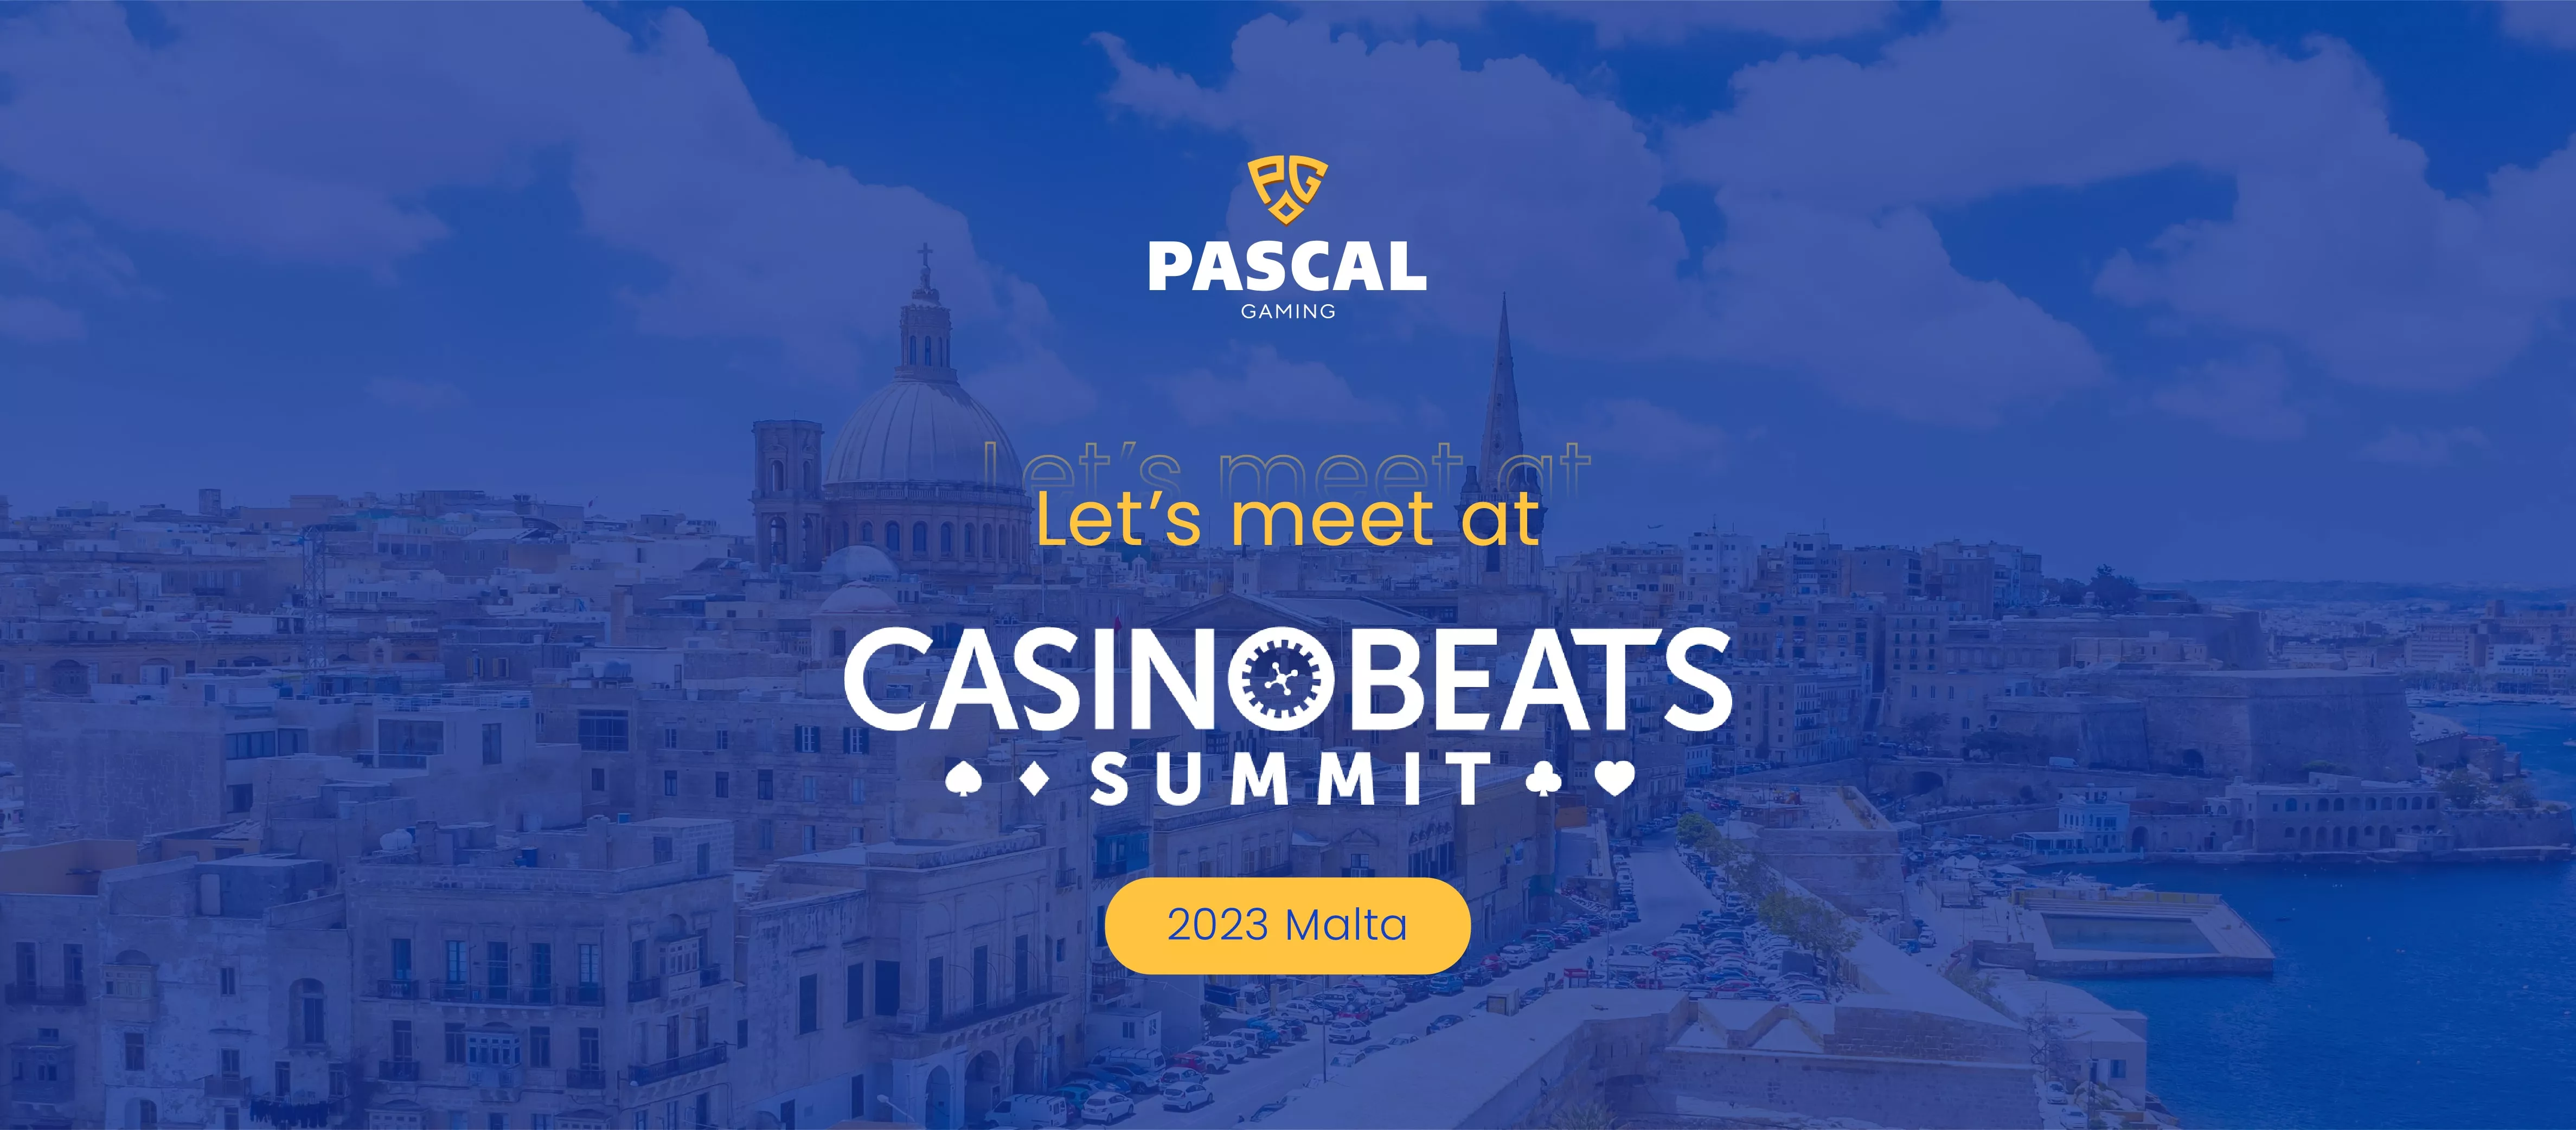 Pascal Gaming Goes in for Casinobeats Summit 2023